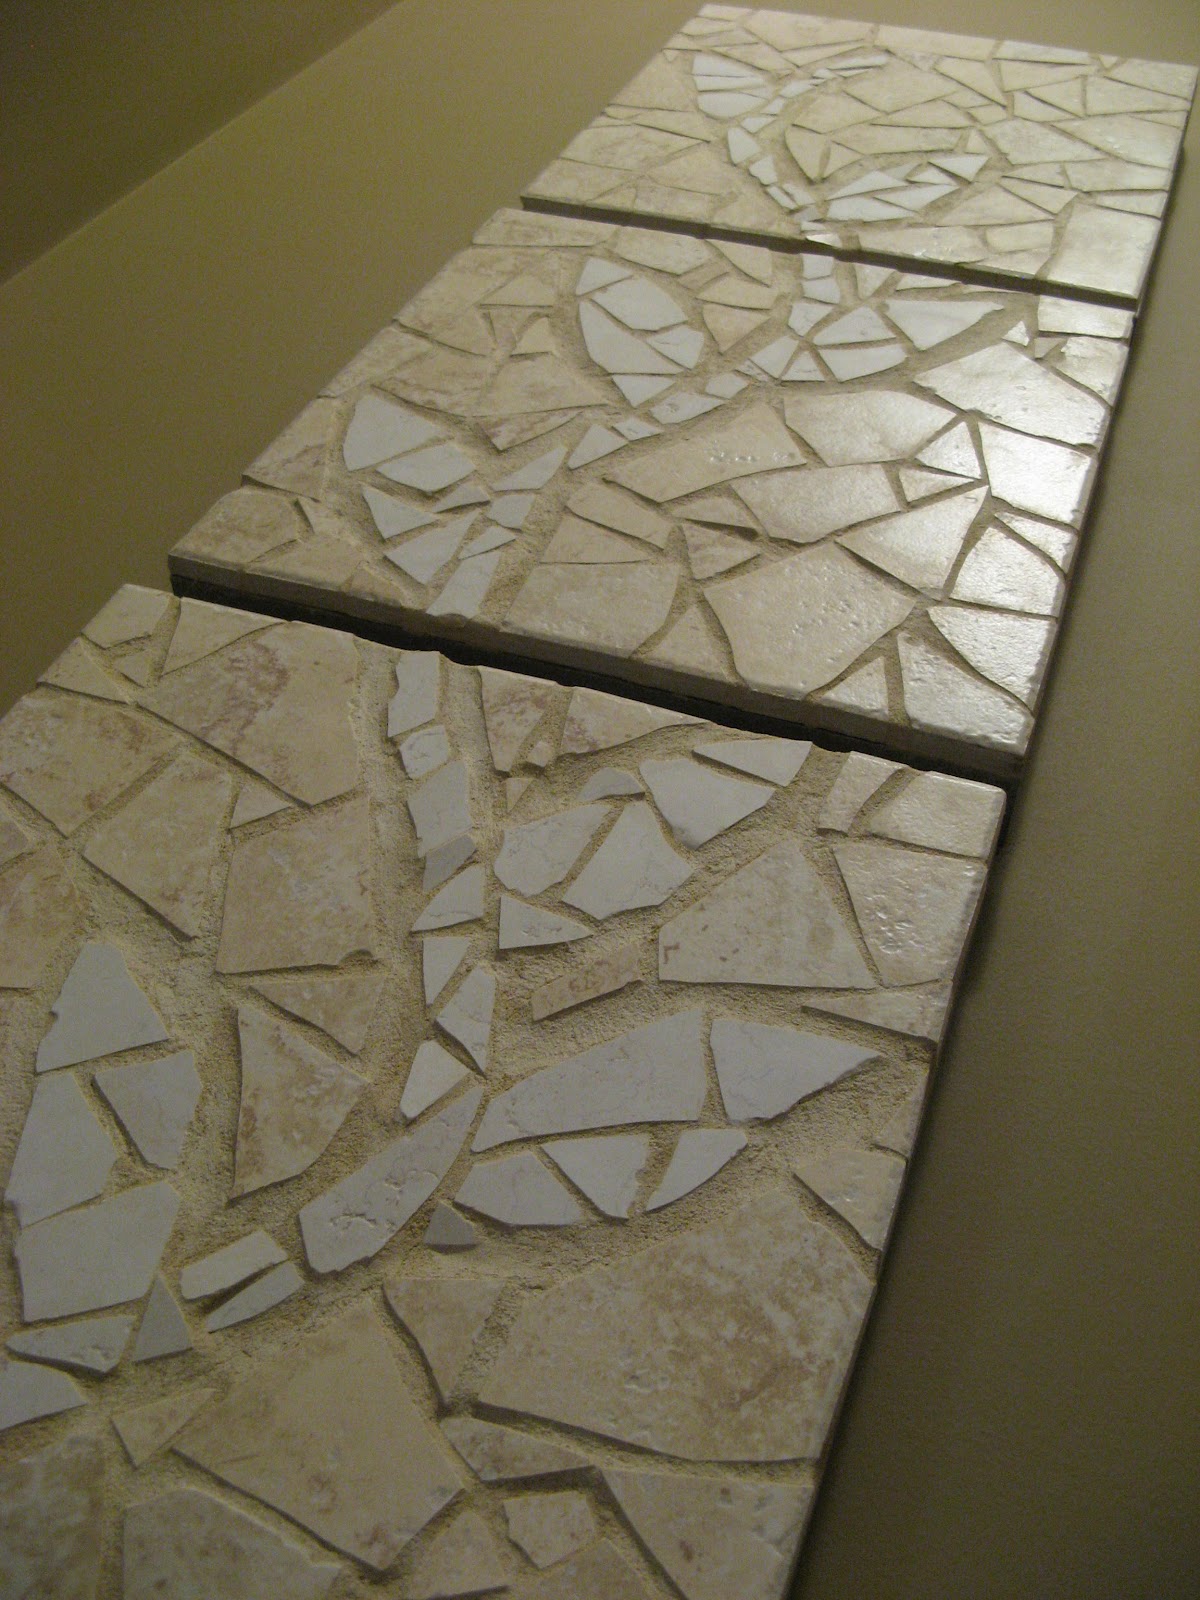 ... ceramic tiles leftover from the installation of the tile floors in our